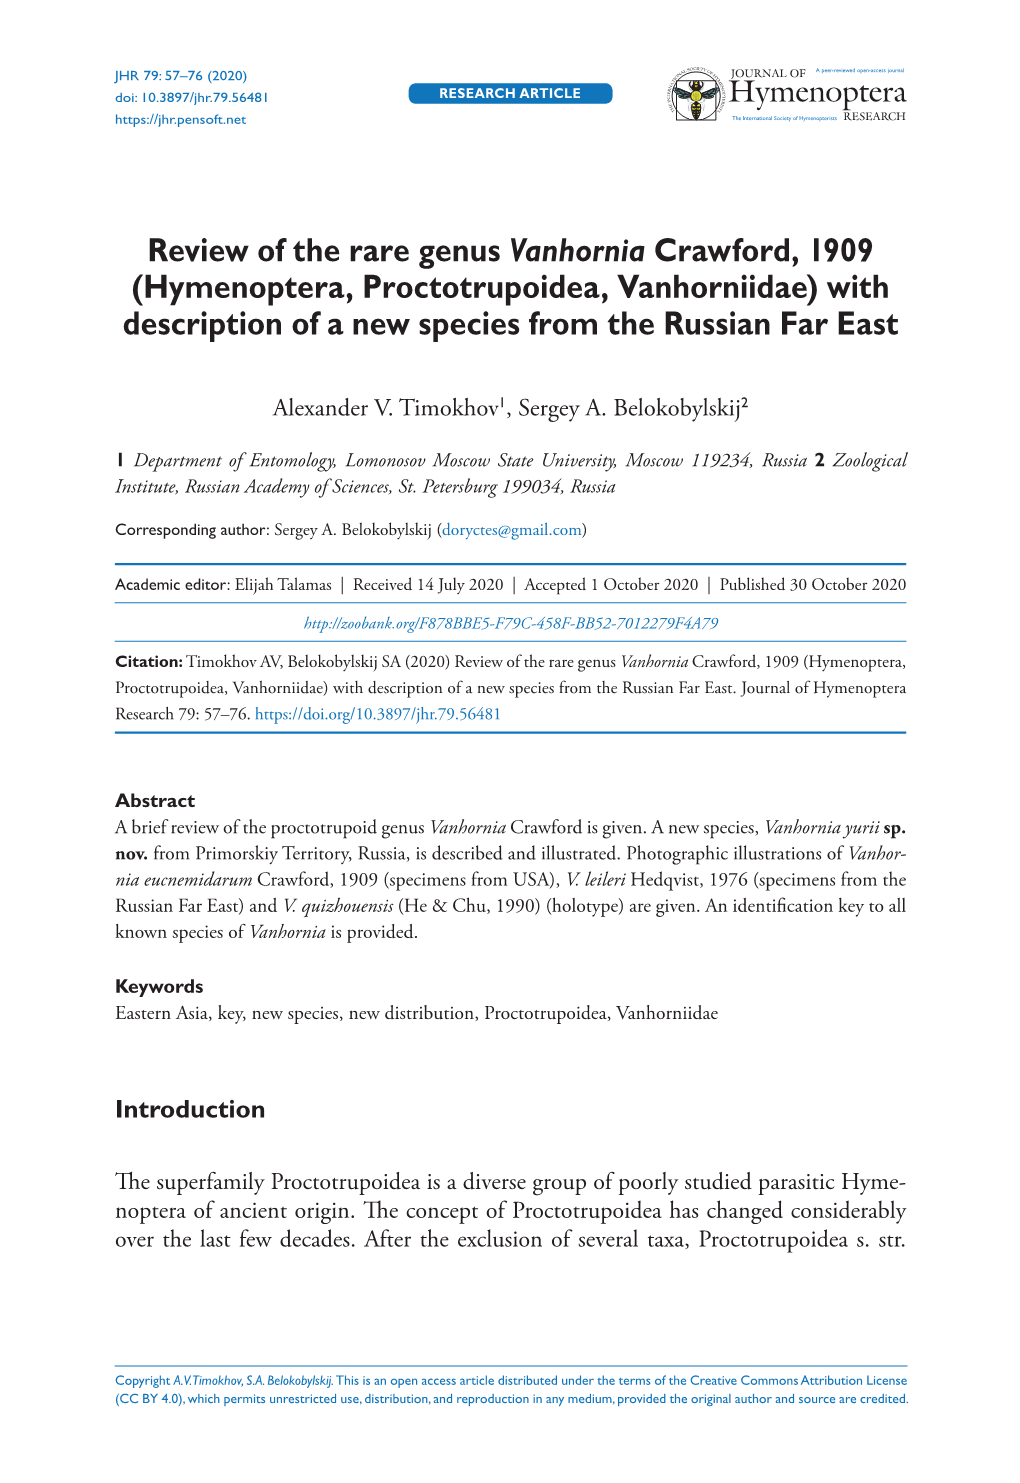 Review of the Rare Genus Vanhornia Crawford, 1909 (Hymenoptera, Proctotrupoidea, Vanhorniidae) with Description of a New Species from the Russian Far East